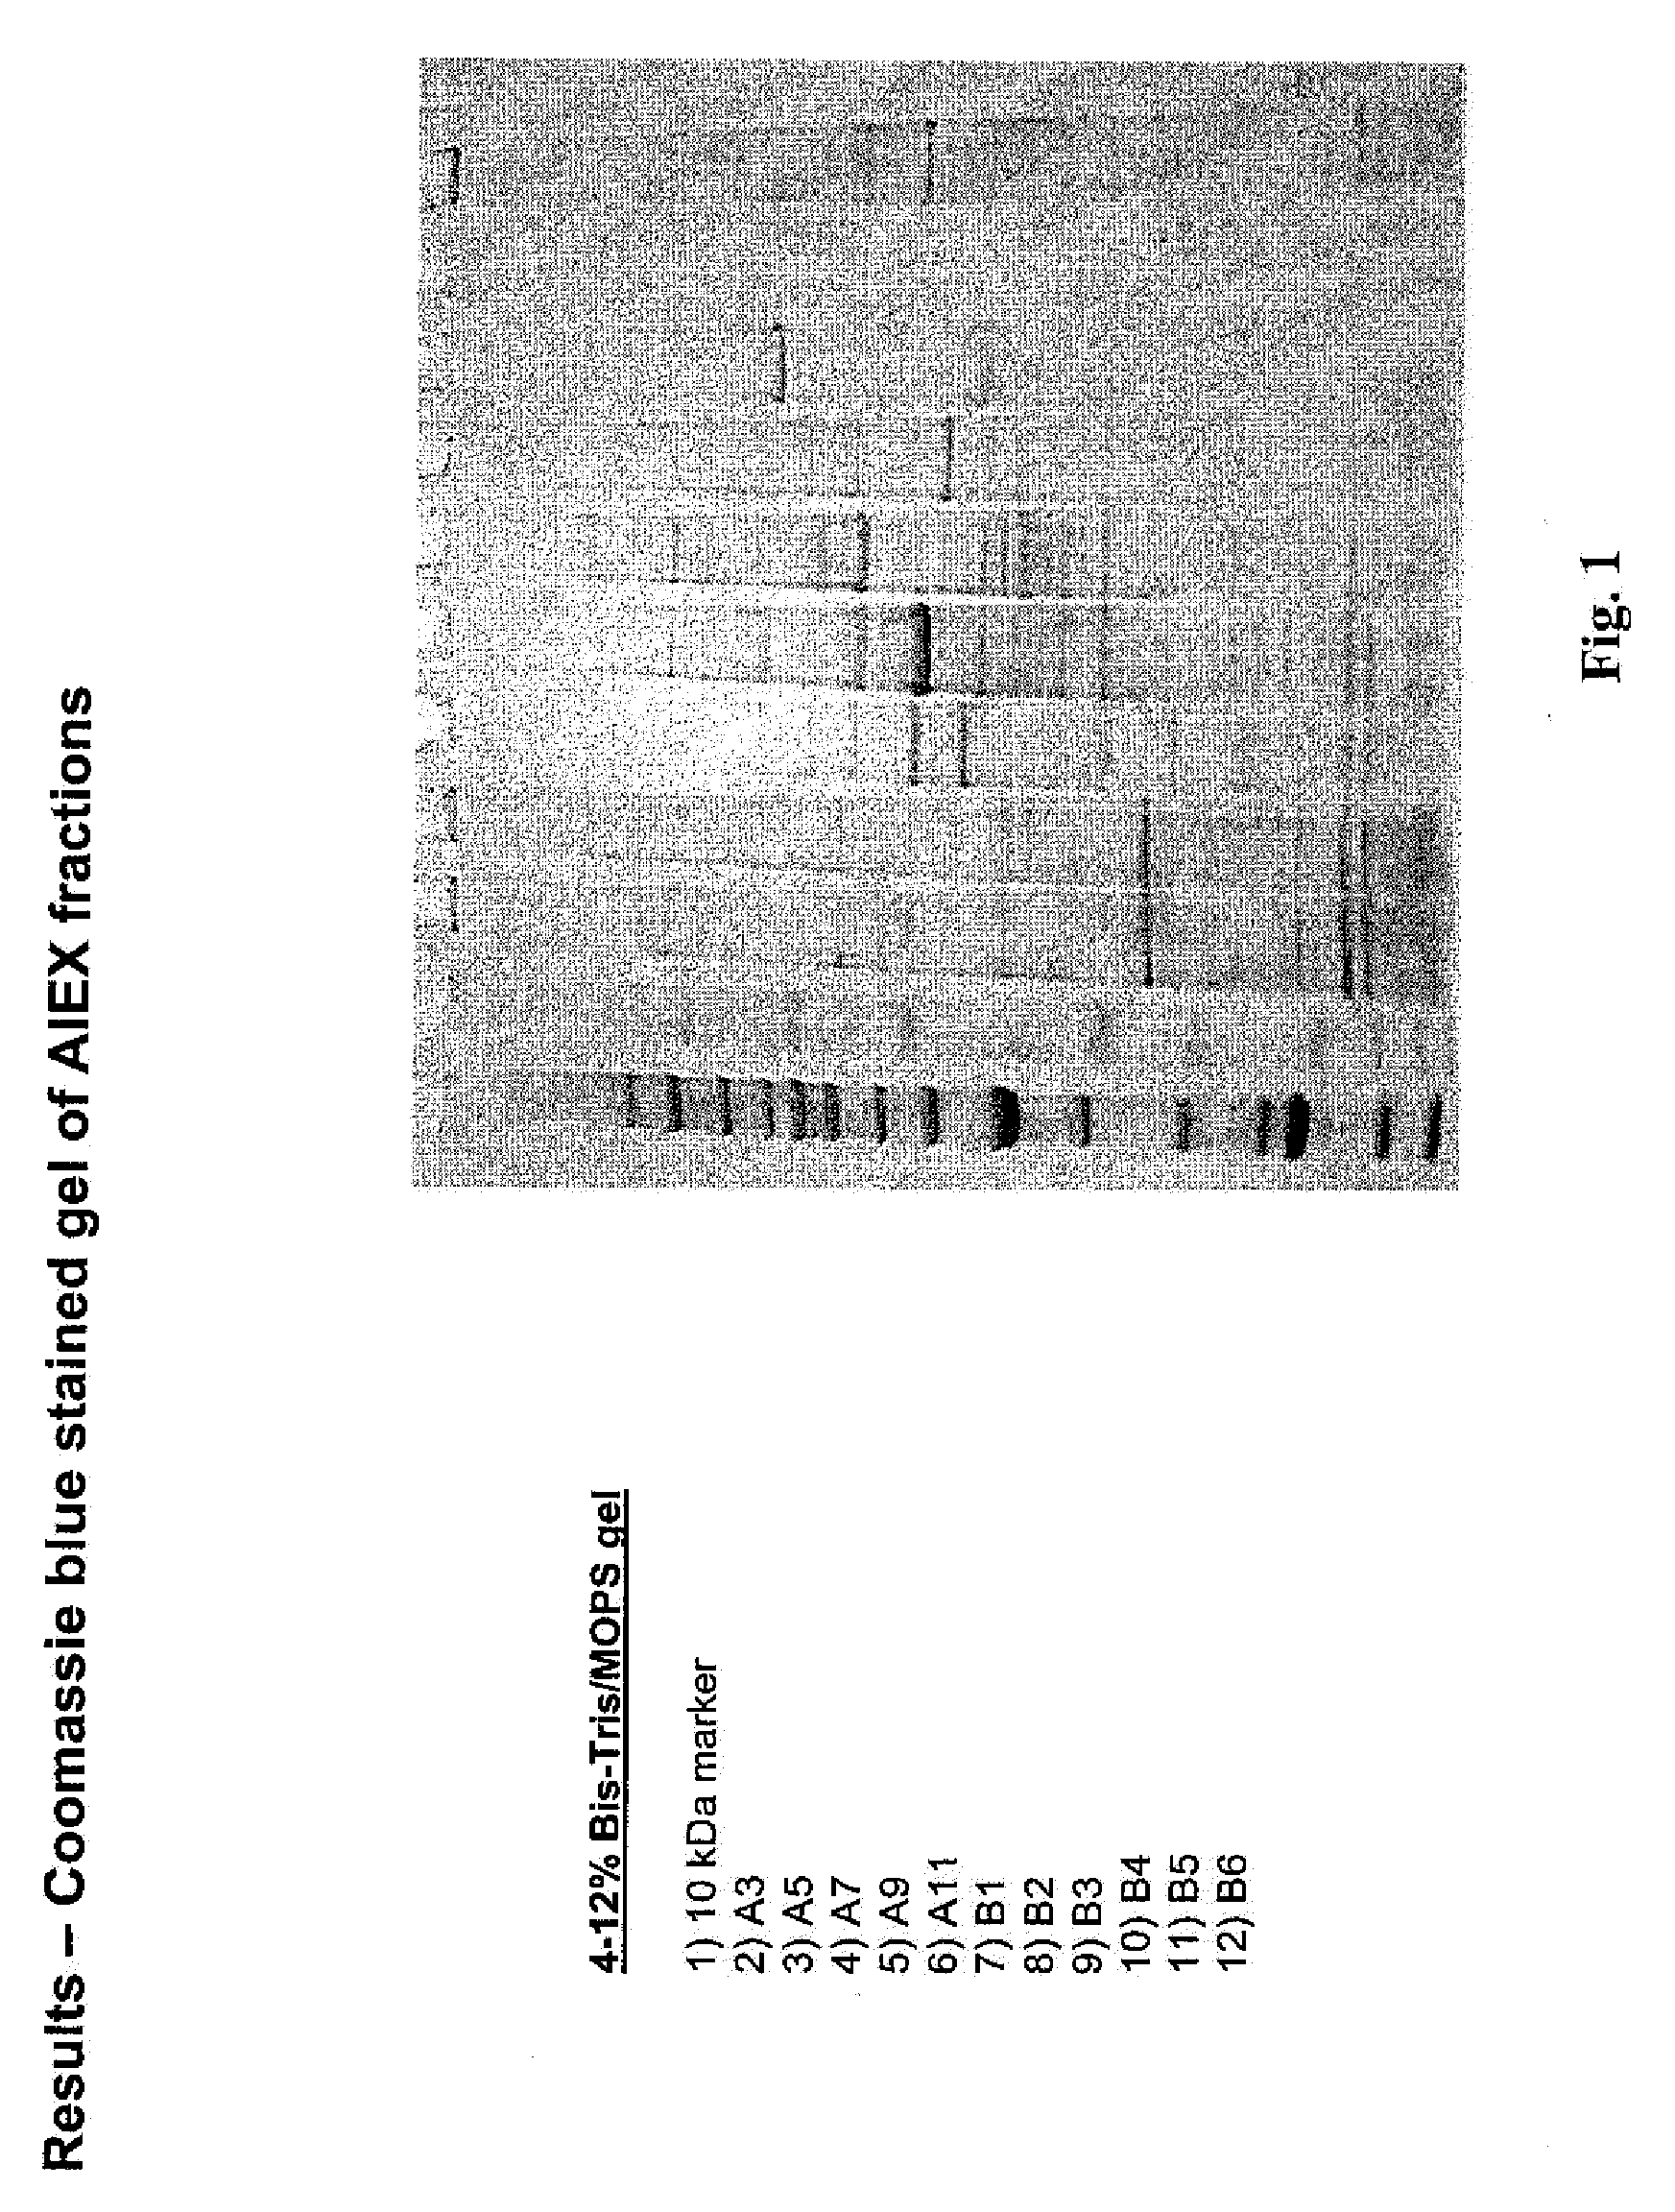 Lawsonia protein useful as a component in subunit vaccine and methods of making and using thereof